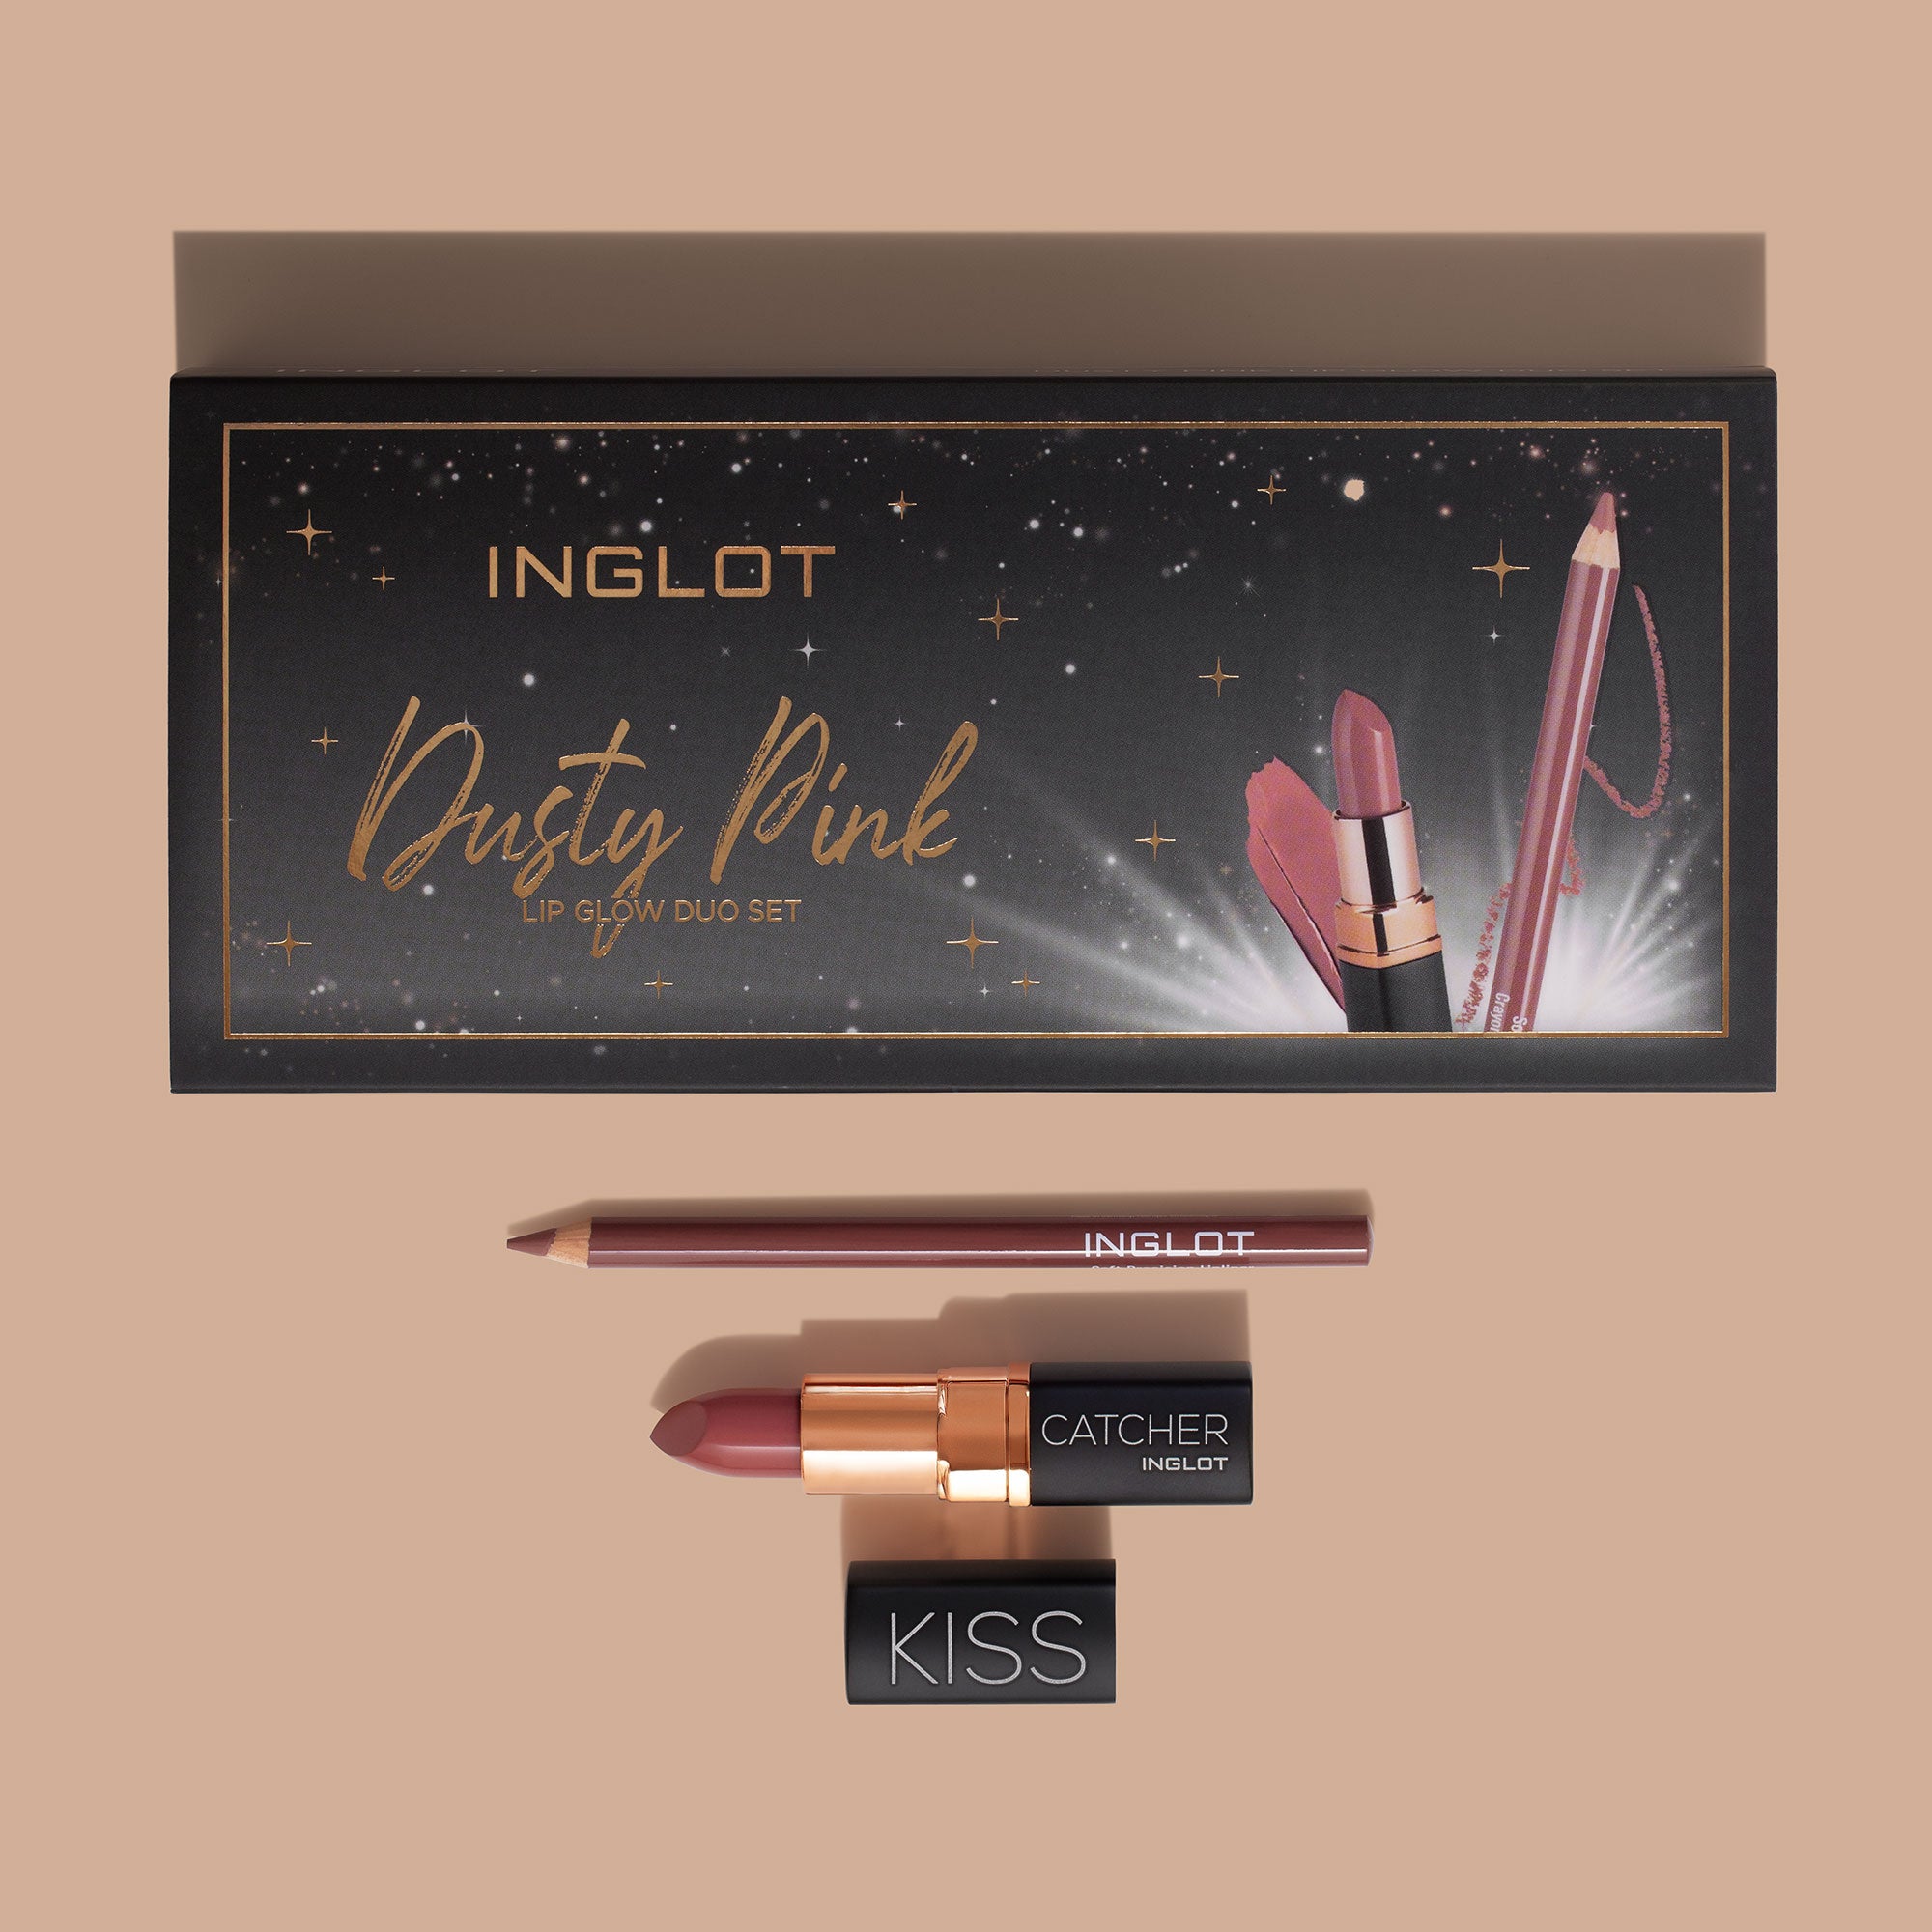 Inglot Dusty Pink Lip Glow Duo Gift Set, box open and product displayed